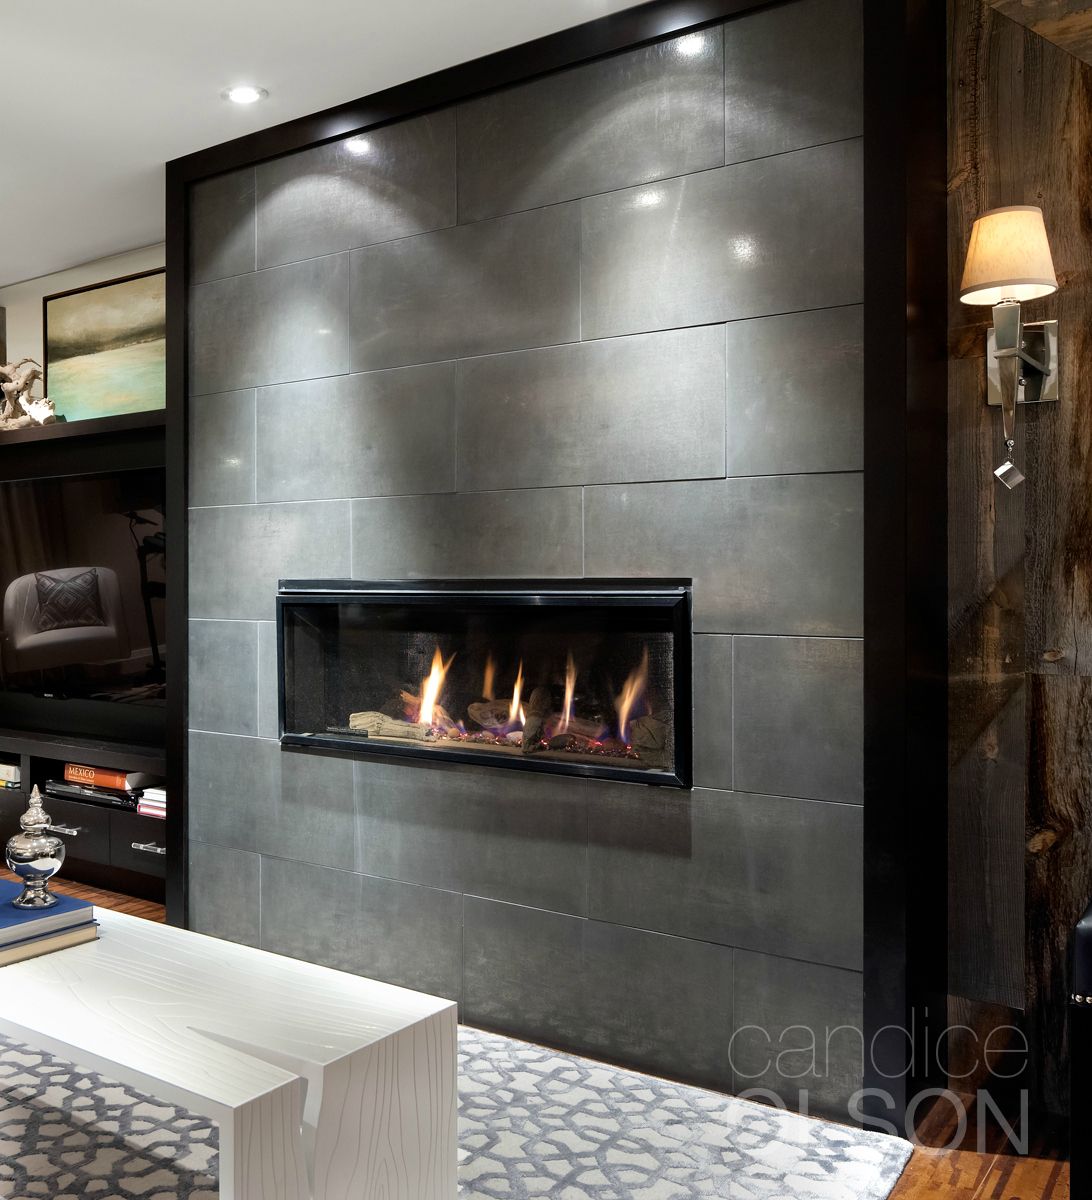 Cement Board Fireplace Lovely 49 Best Advice • Fireplace Design Images